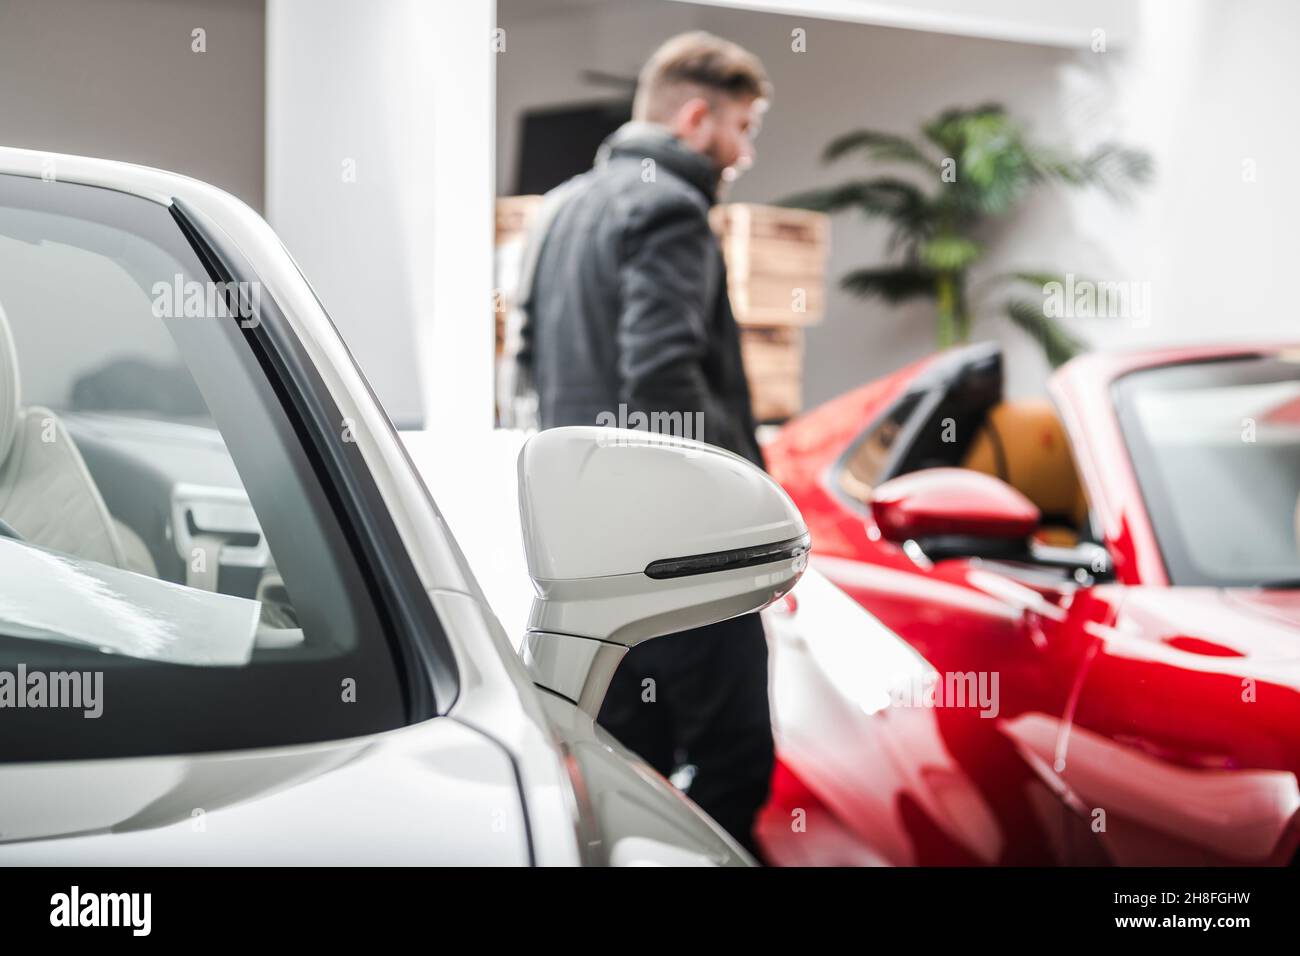 Automotive Industry Theme. New Exotic and Luxury Vehicles Shopping. Caucasian Client Inside Dealership Showroom. Stock Photo